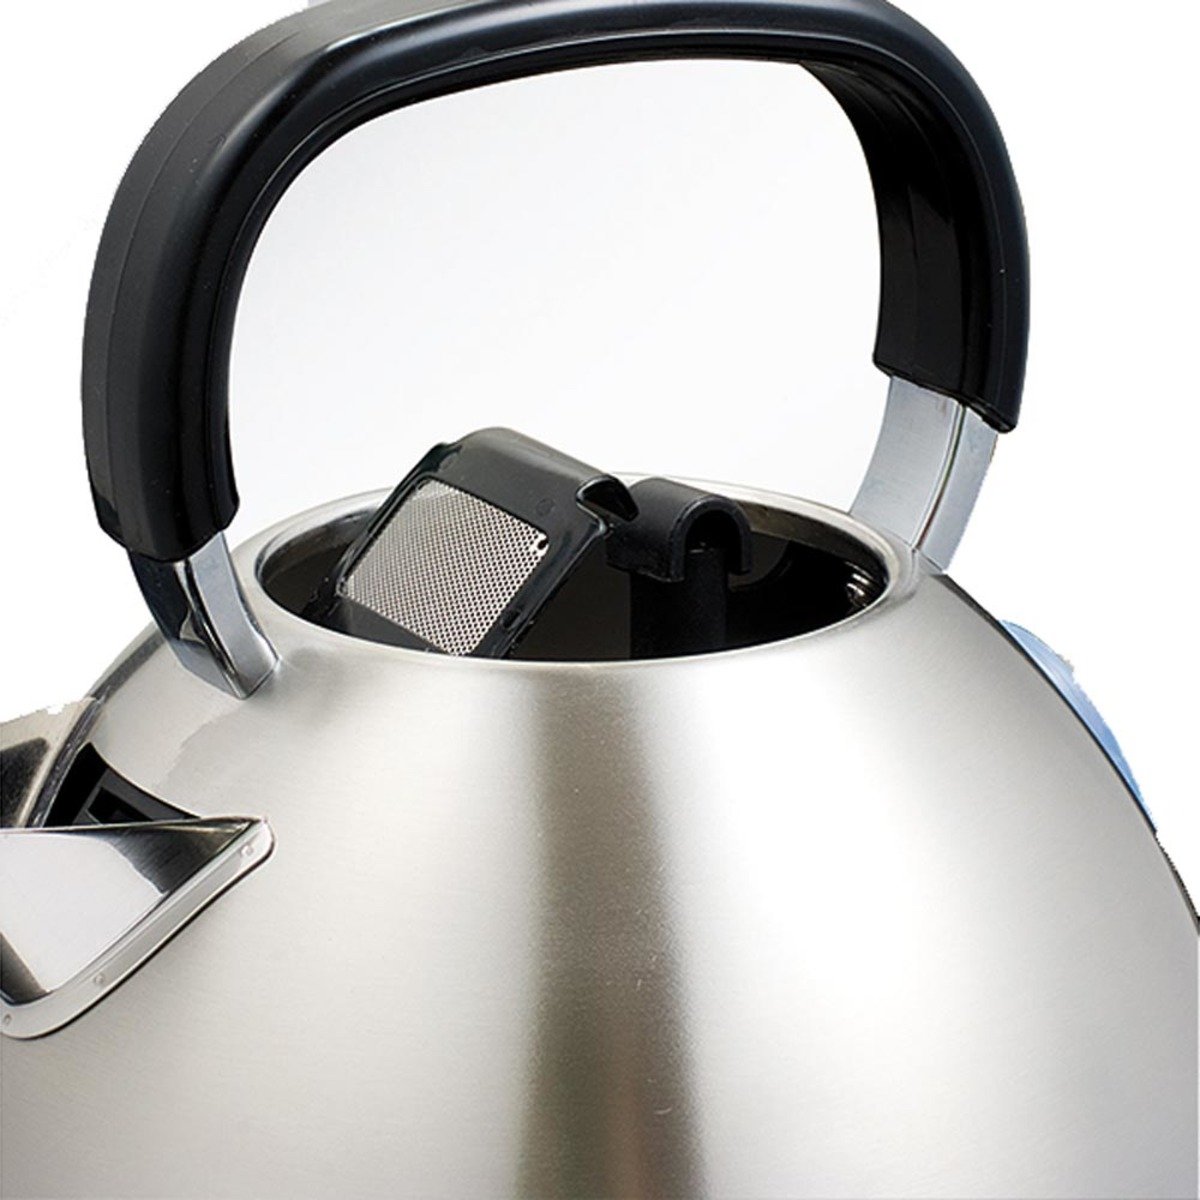 Kenwood  1.6Litrer Cordless Electric Kettle, 3000W Rapid Boil System, Stainless Steel Traditional Electric Kettle, SKM100